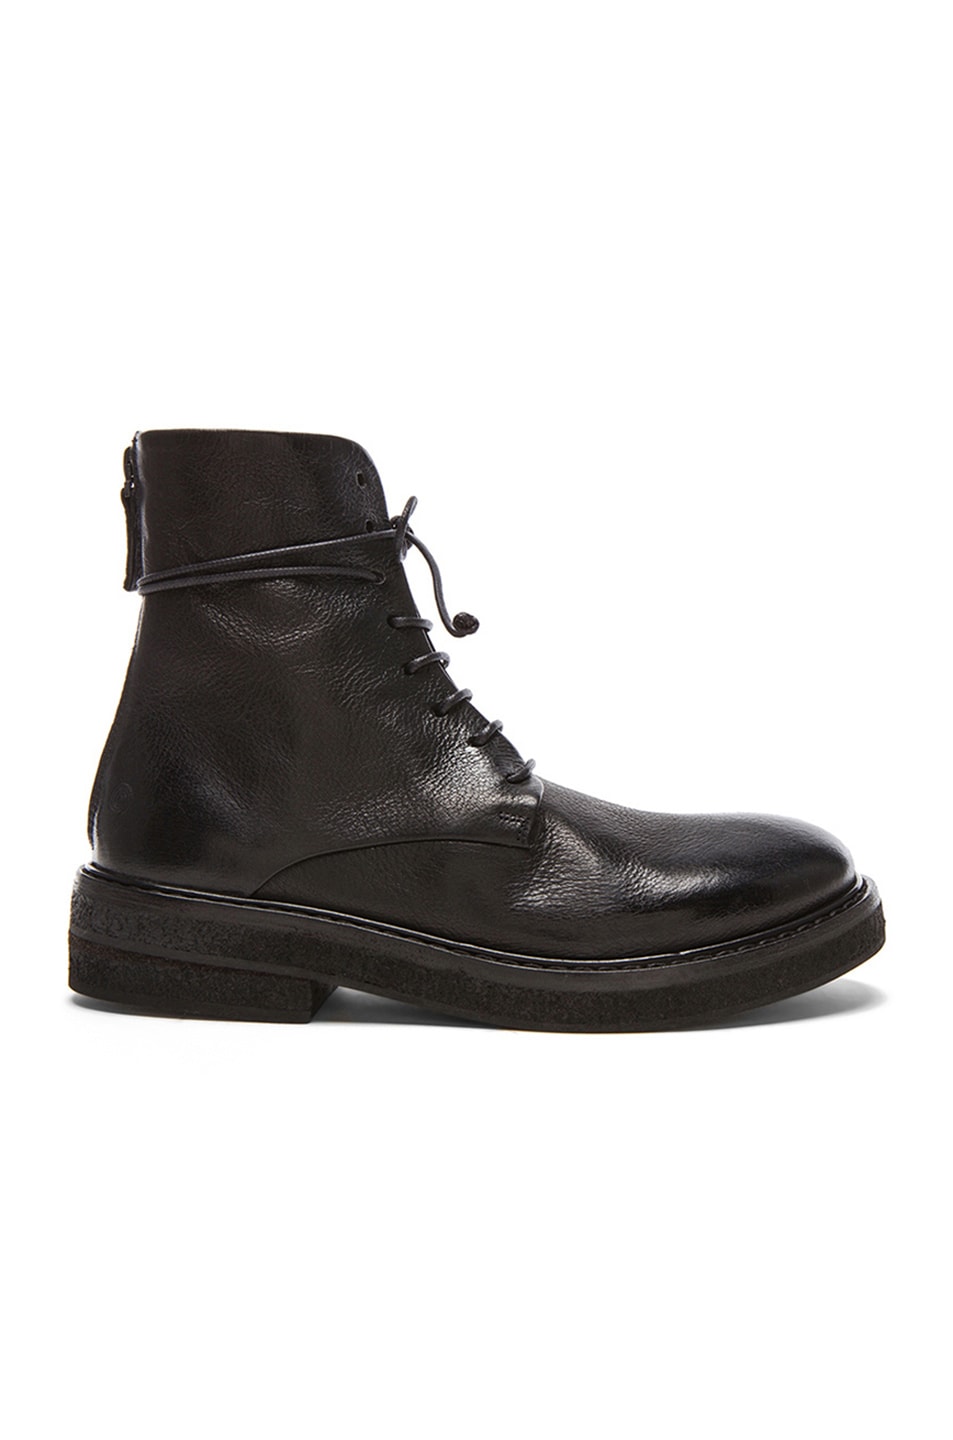 Marsell Lace Up Utility Leather Boots in Nero | FWRD